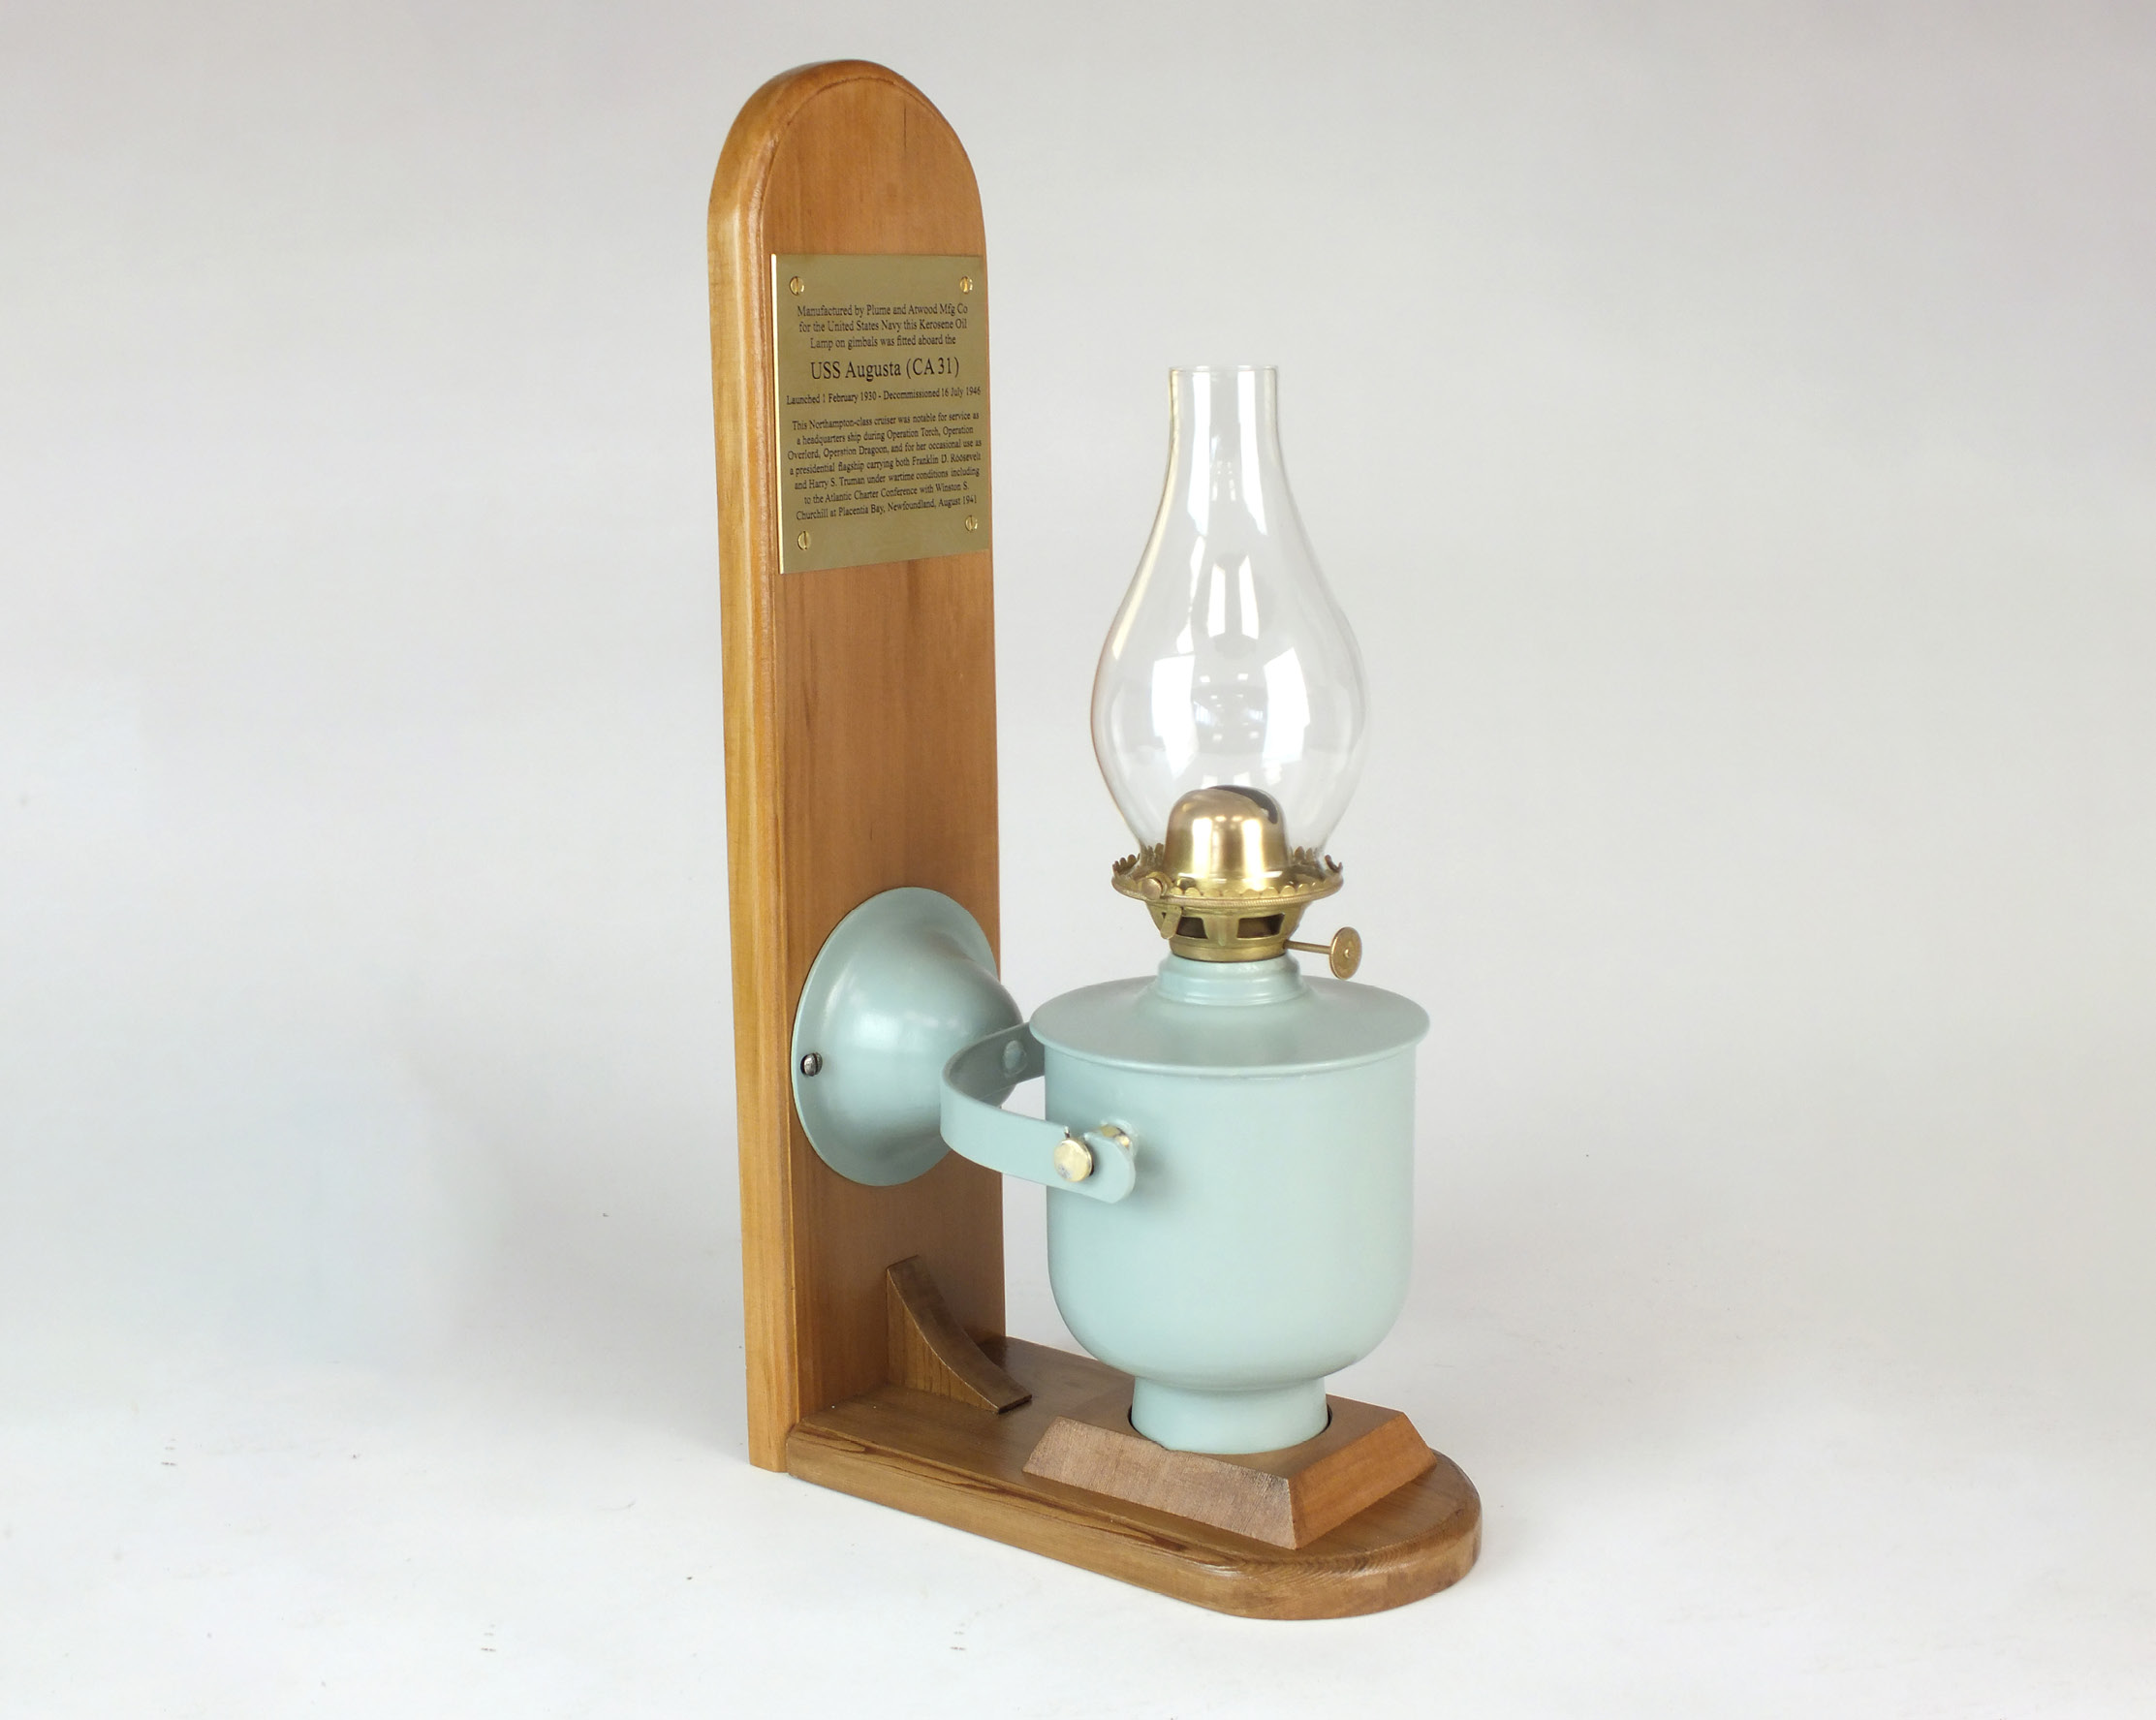 Oil lamp from the USS Augusta consigned to our next Militaria Auction